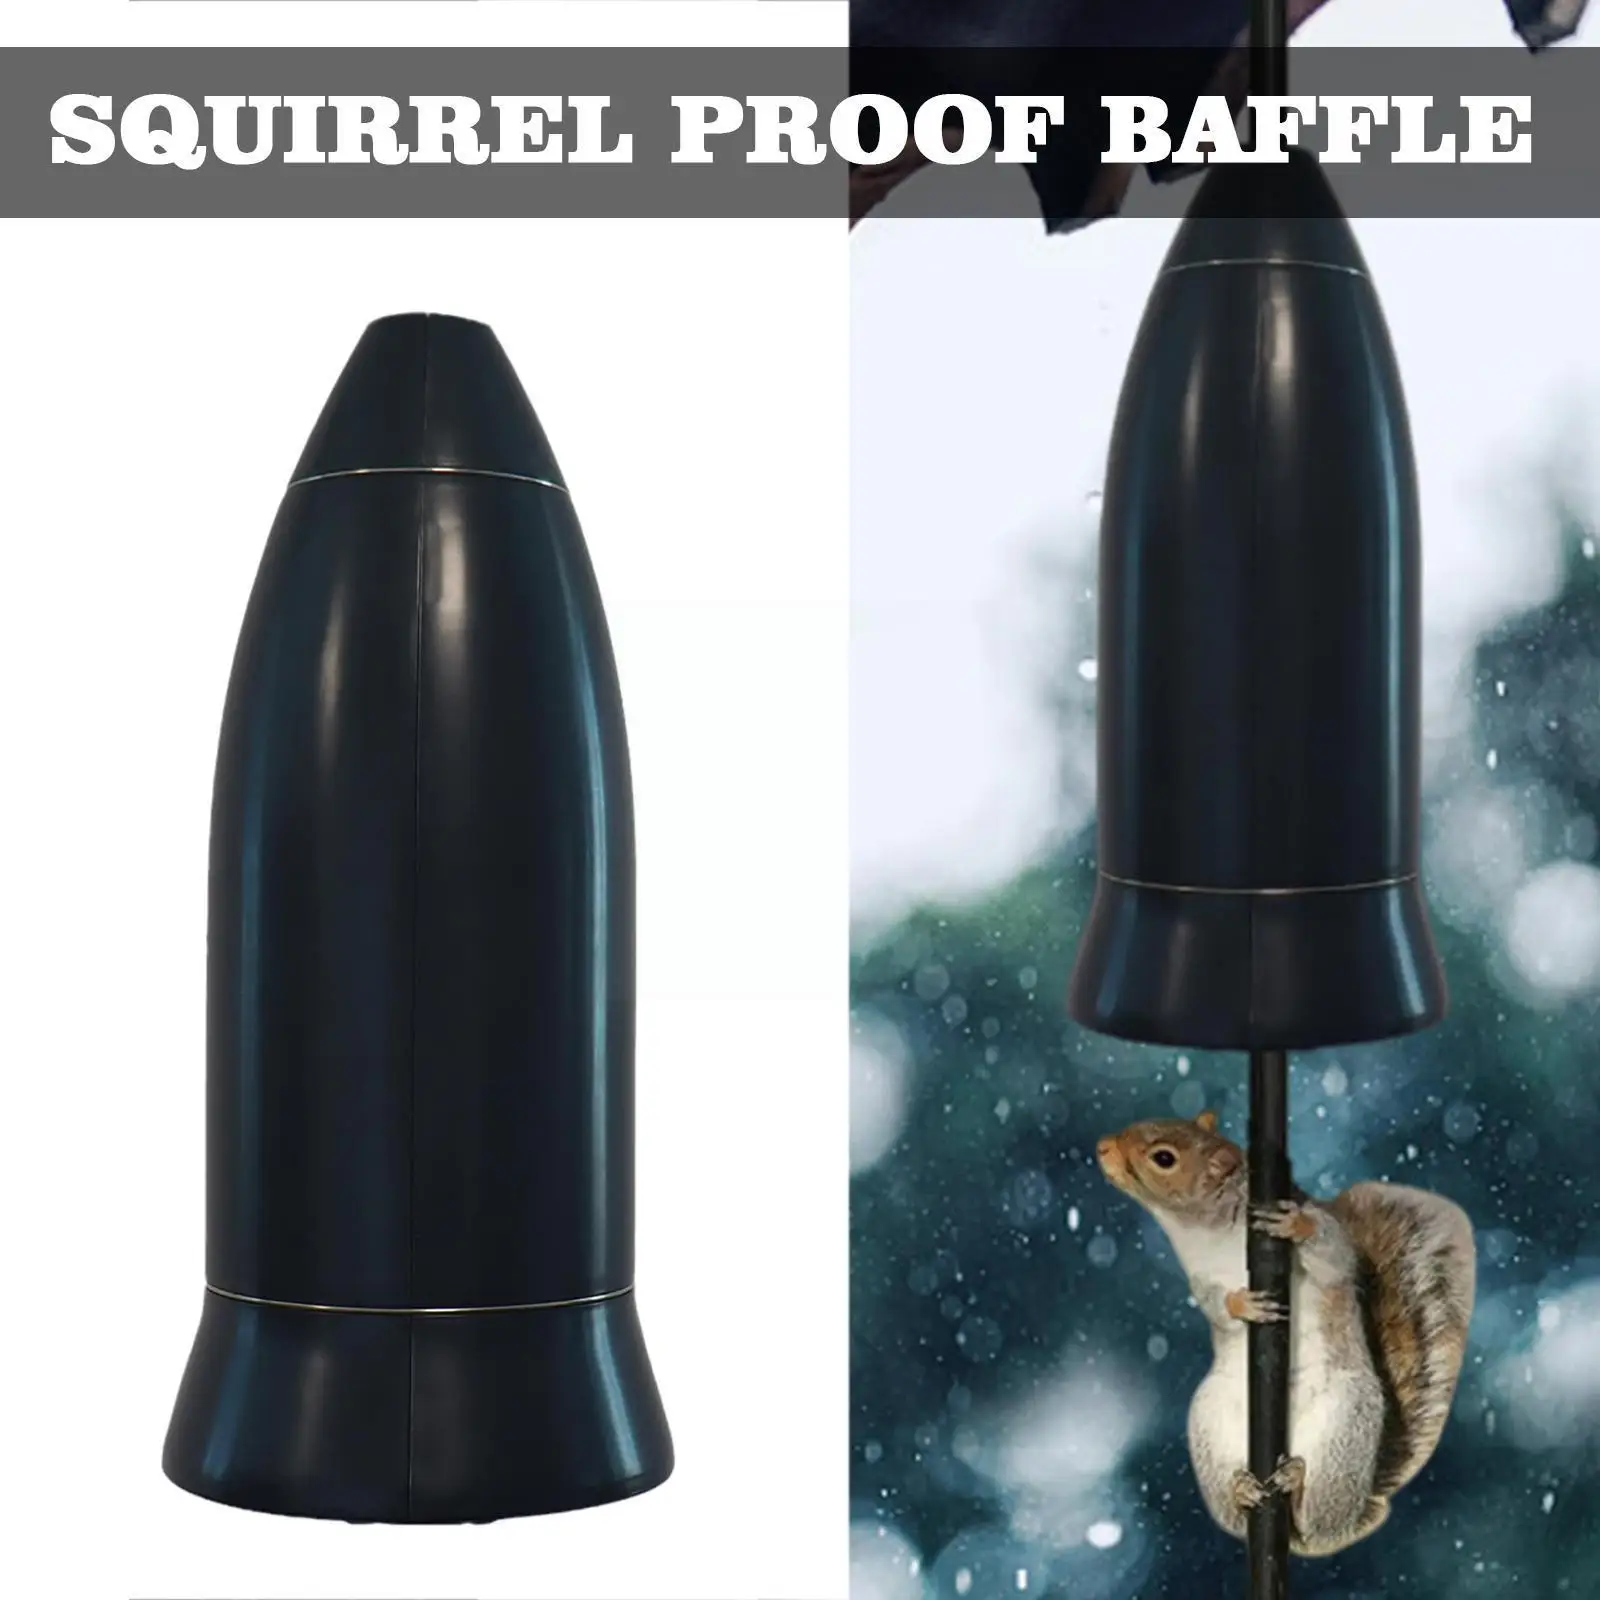 

Pet Bird Feeder New Squirrel Proof Baffle Wrap Guard Durable Around Hanging Hanging Protects Protects Feeders Bird Q3N6